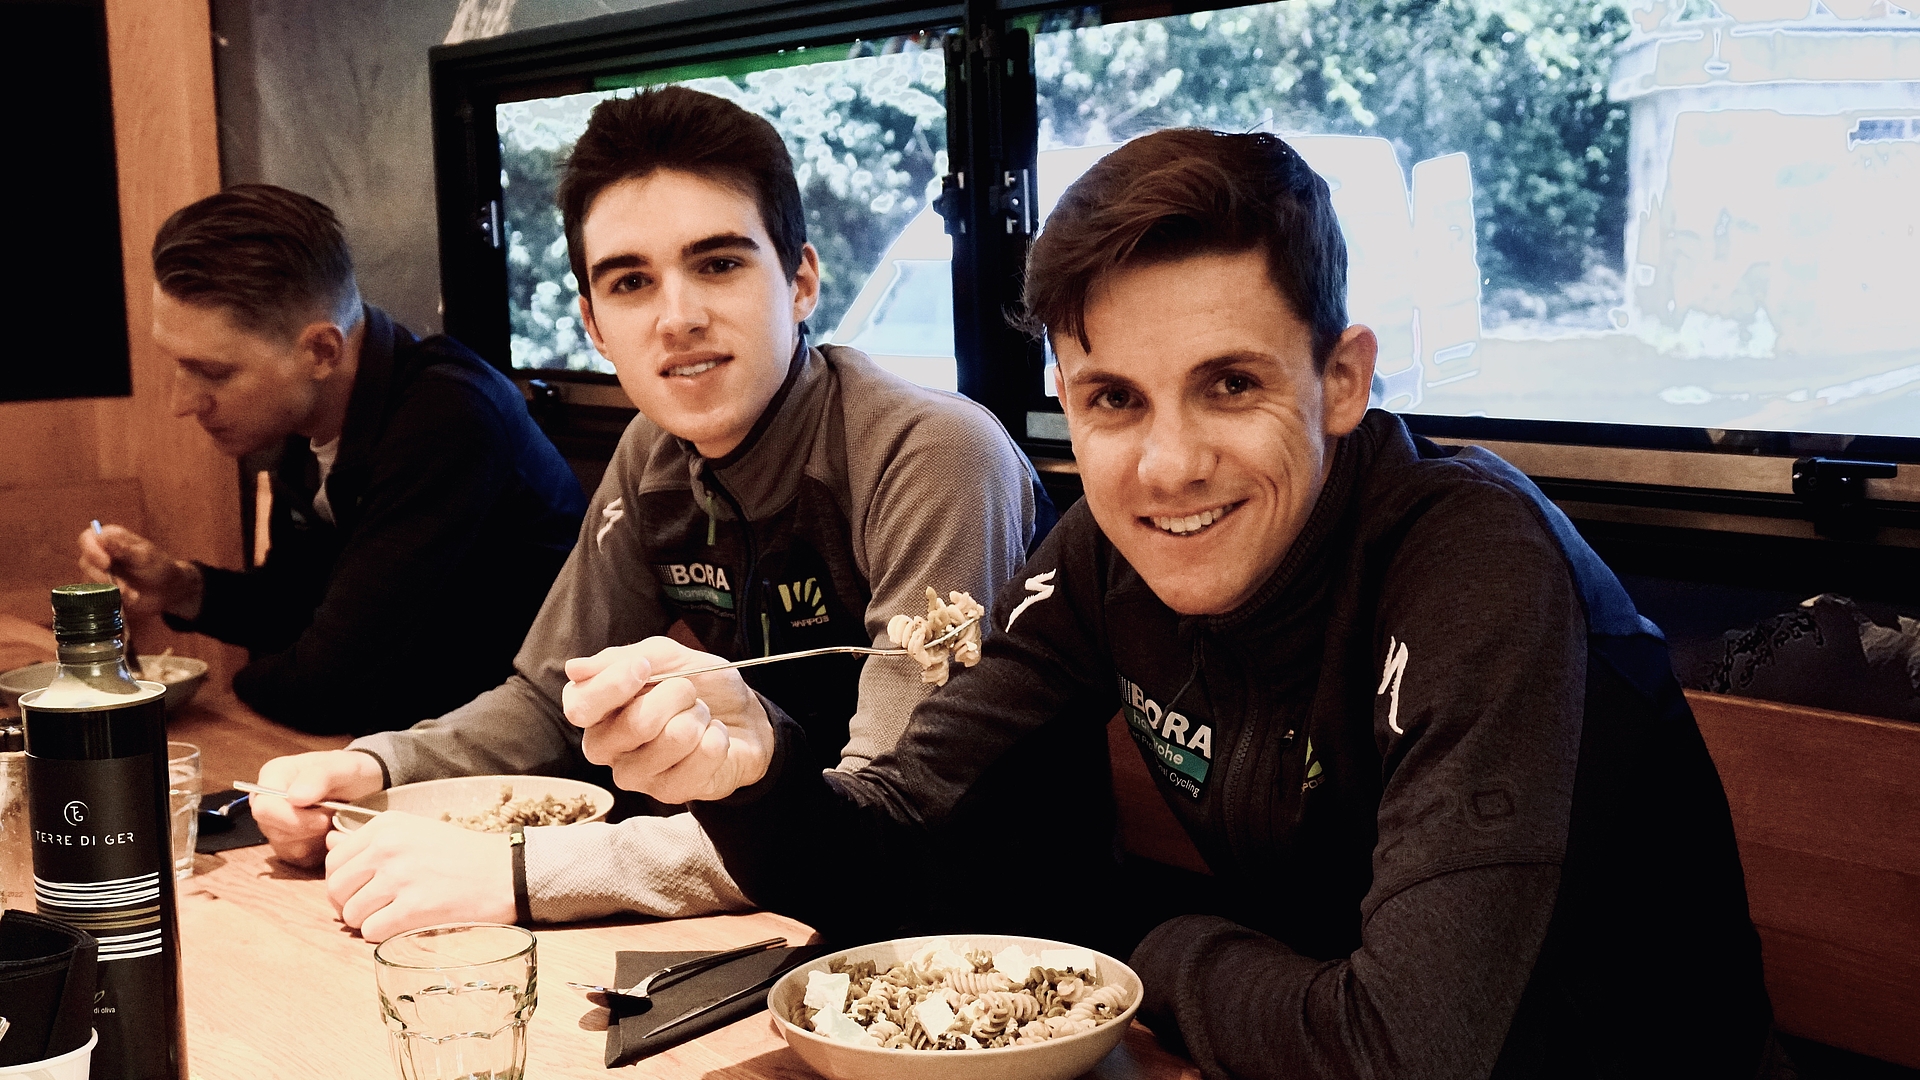 Eating a gluten-free diet as a pro cyclist